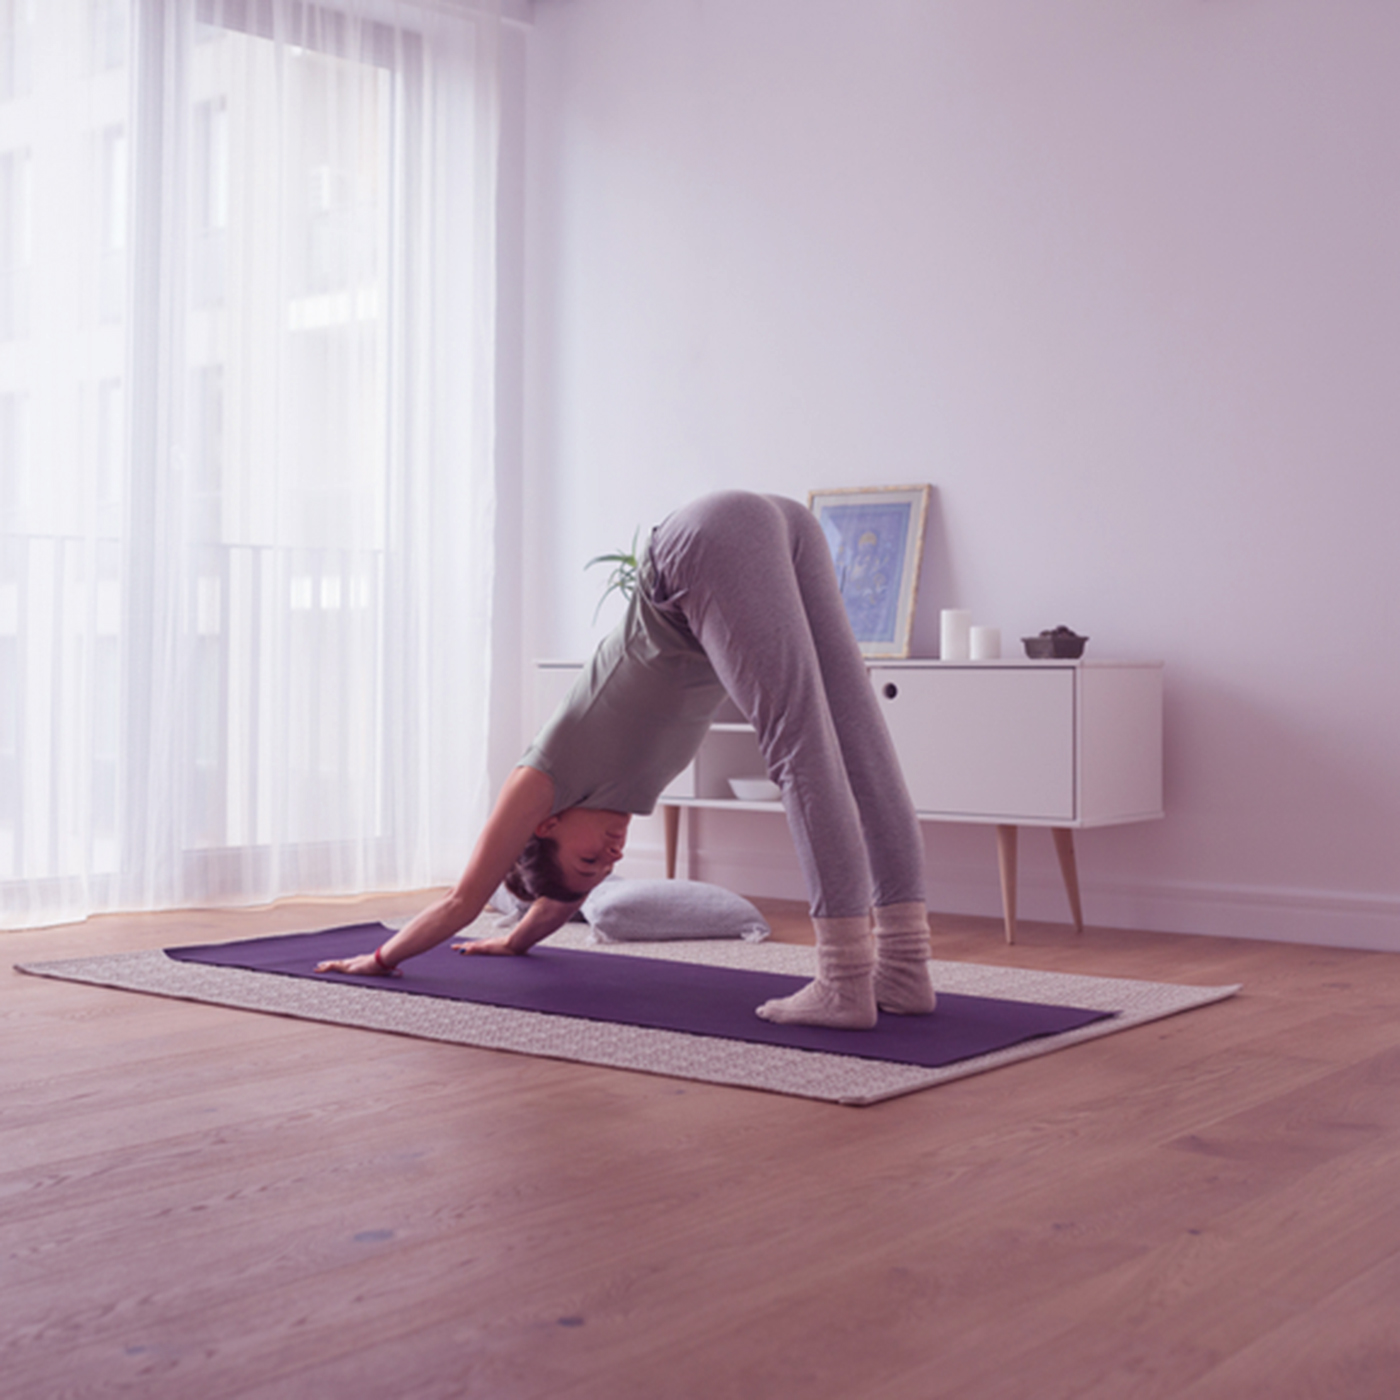 Downward Facing Dog: The Incredible Benefits (& How to Do the Pose)